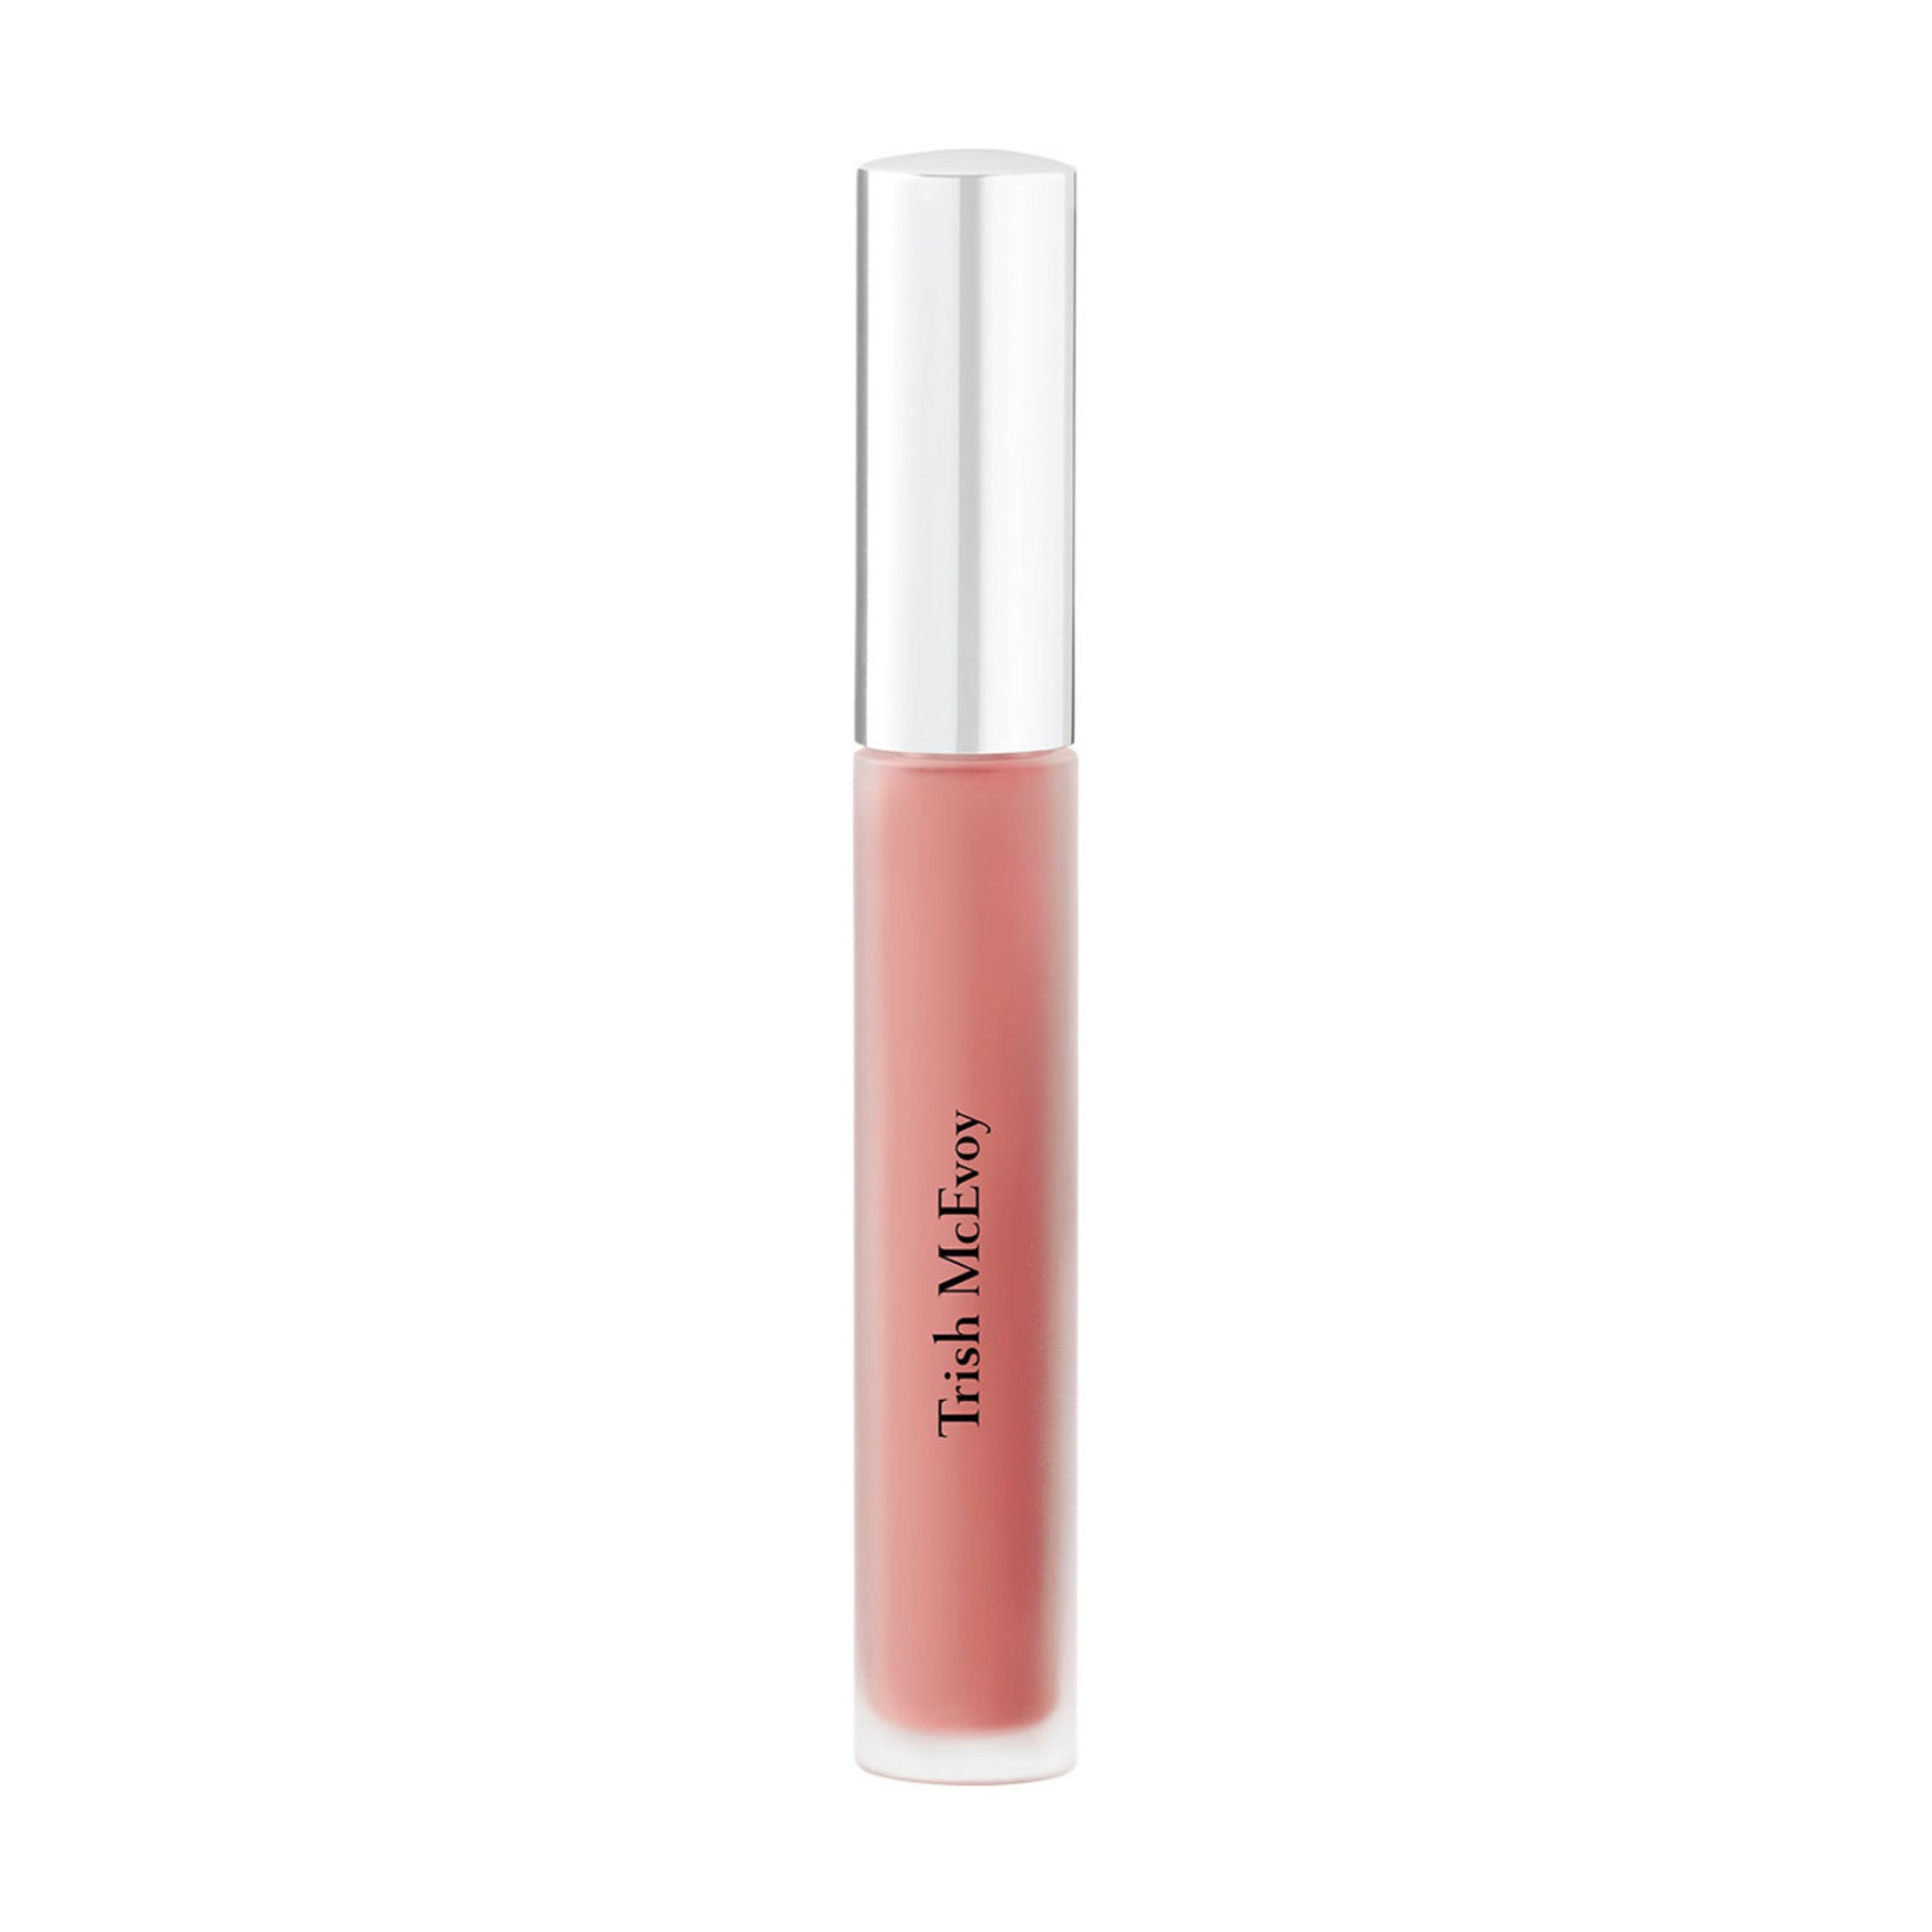 Trish McEvoy Beauty Booster Balm Lip and Cheek Color/Shade variant: Nude main image.